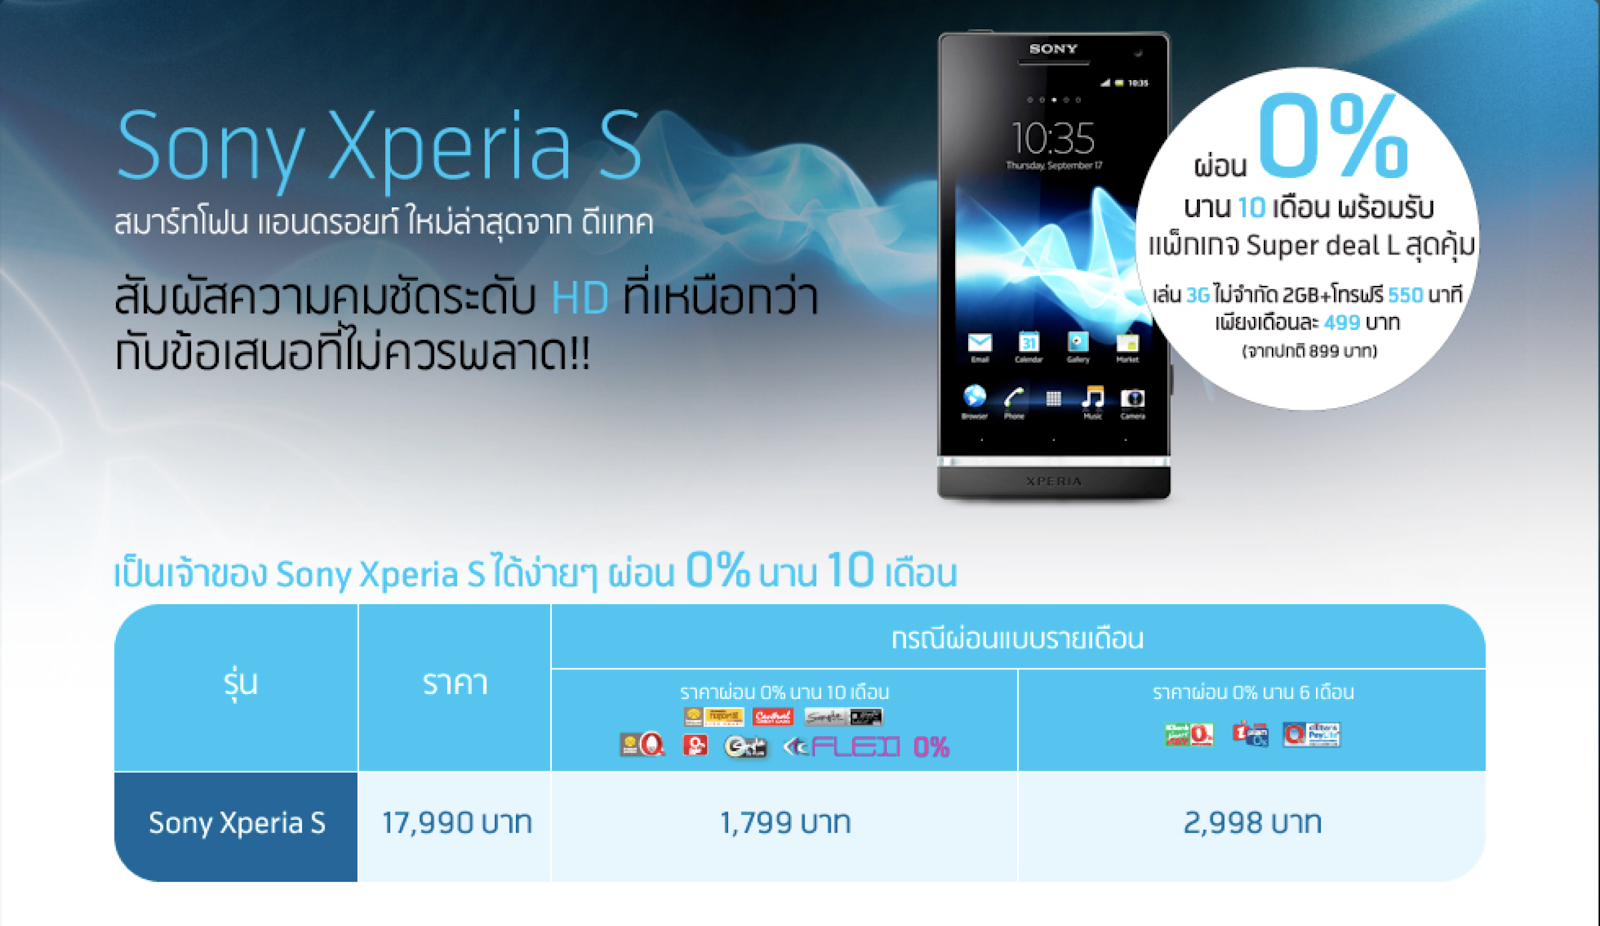 Sony Xperia S by DTAC